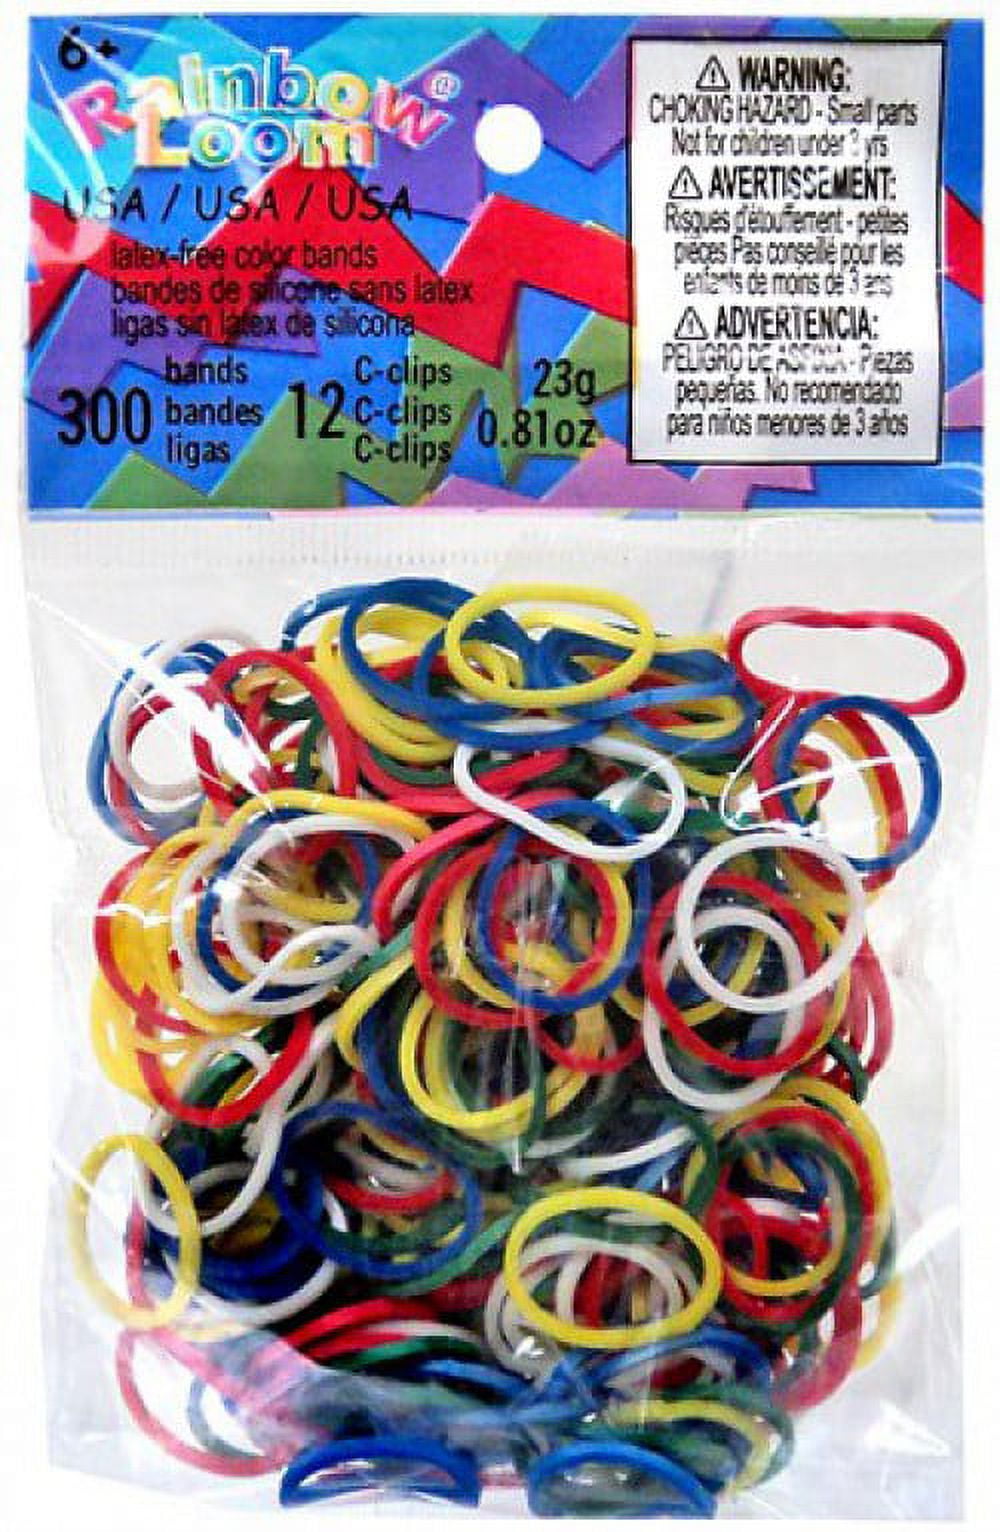 Rainbow Loom Mixed Neon Rubber Bands Refill Pack RL34 300 Count Twistz  Bandz - ToyWiz